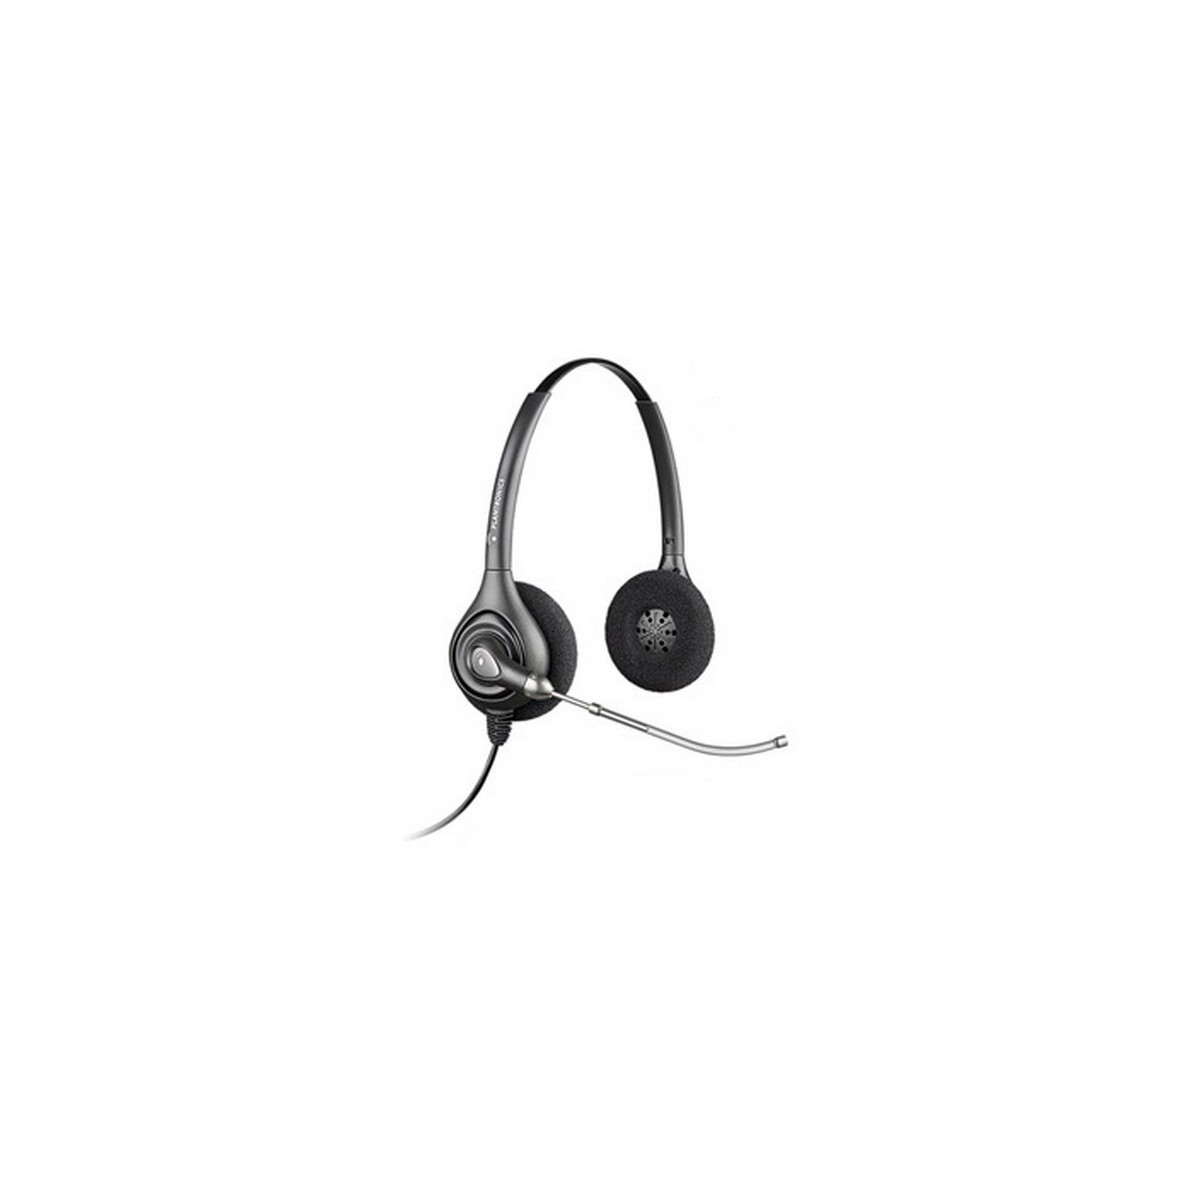 Poly HW261H - Headset - Head-band - Office/Call center - Black - Binaural - Wired